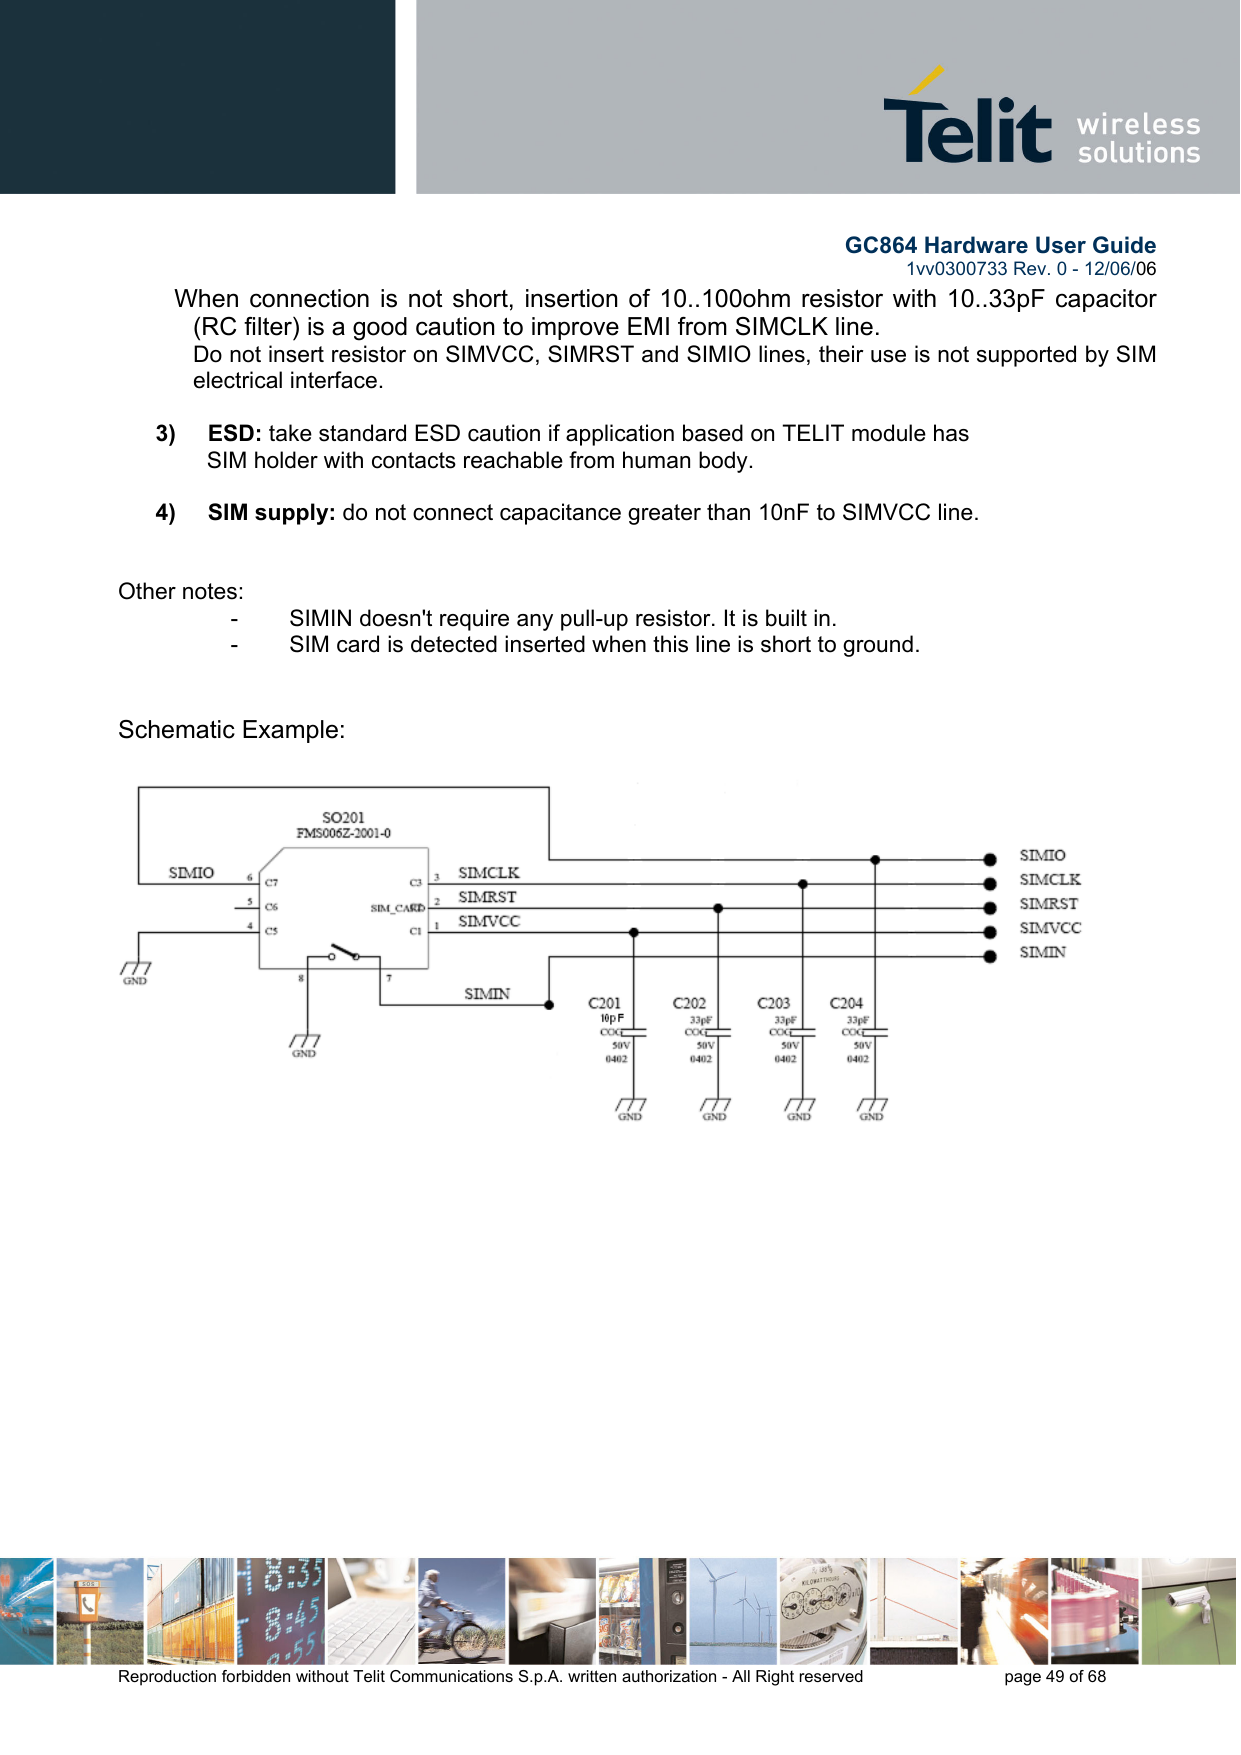        GC864 Hardware User Guide  1vv0300733 Rev. 0 - 12/06/06  Reproduction forbidden without Telit Communications S.p.A. written authorization - All Right reserved    page 49 of 68  When connection is not short, insertion of 10..100ohm resistor with 10..33pF capacitor (RC filter) is a good caution to improve EMI from SIMCLK line. Do not insert resistor on SIMVCC, SIMRST and SIMIO lines, their use is not supported by SIM electrical interface.  3)     ESD: take standard ESD caution if application based on TELIT module has      SIM holder with contacts reachable from human body.   4)     SIM supply: do not connect capacitance greater than 10nF to SIMVCC line.    Other notes: -        SIMIN doesn&apos;t require any pull-up resistor. It is built in. -        SIM card is detected inserted when this line is short to ground.    Schematic Example:   